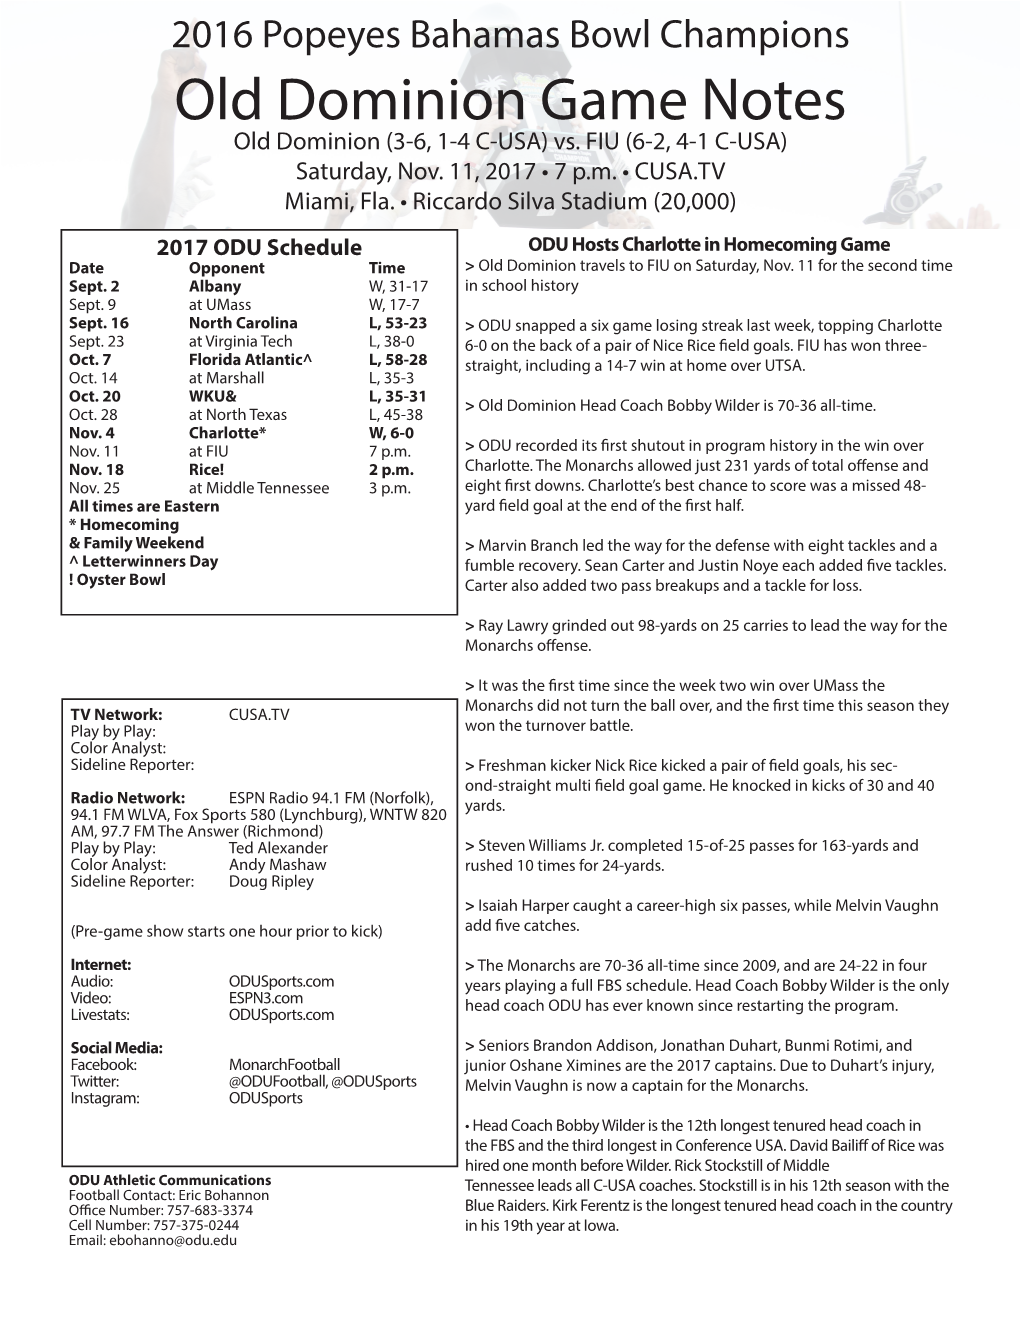 Old Dominion Game Notes Old Dominion (3-6, 1-4 C-USA) Vs